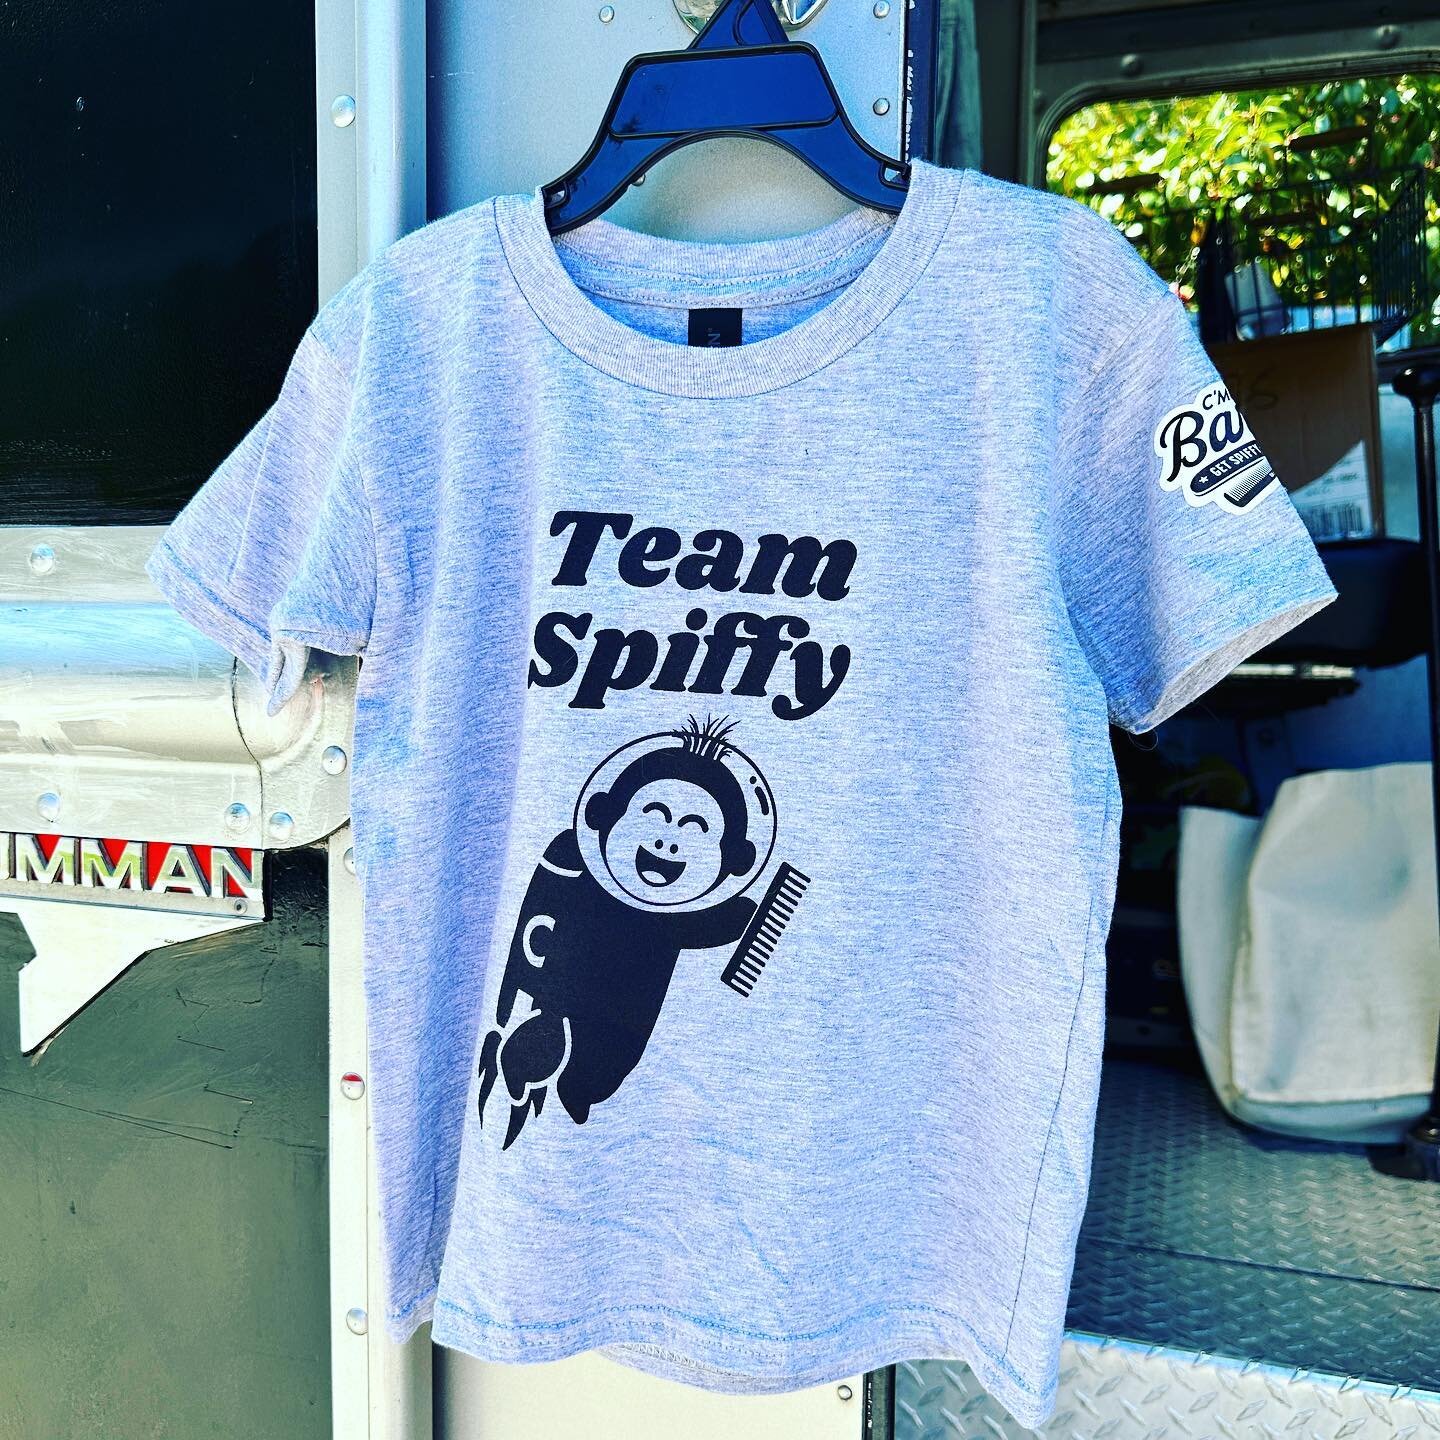 Finally! KIDS WEAR for all the C&rsquo;Mon Barber Kids - join Team Spiffy today! $20 for kids tees. Kids starting at Youth Small and yes there&rsquo;s adult ones too! Adults up to XL. In the shop or online and we&rsquo;ll ship it to you! #shoplocal #